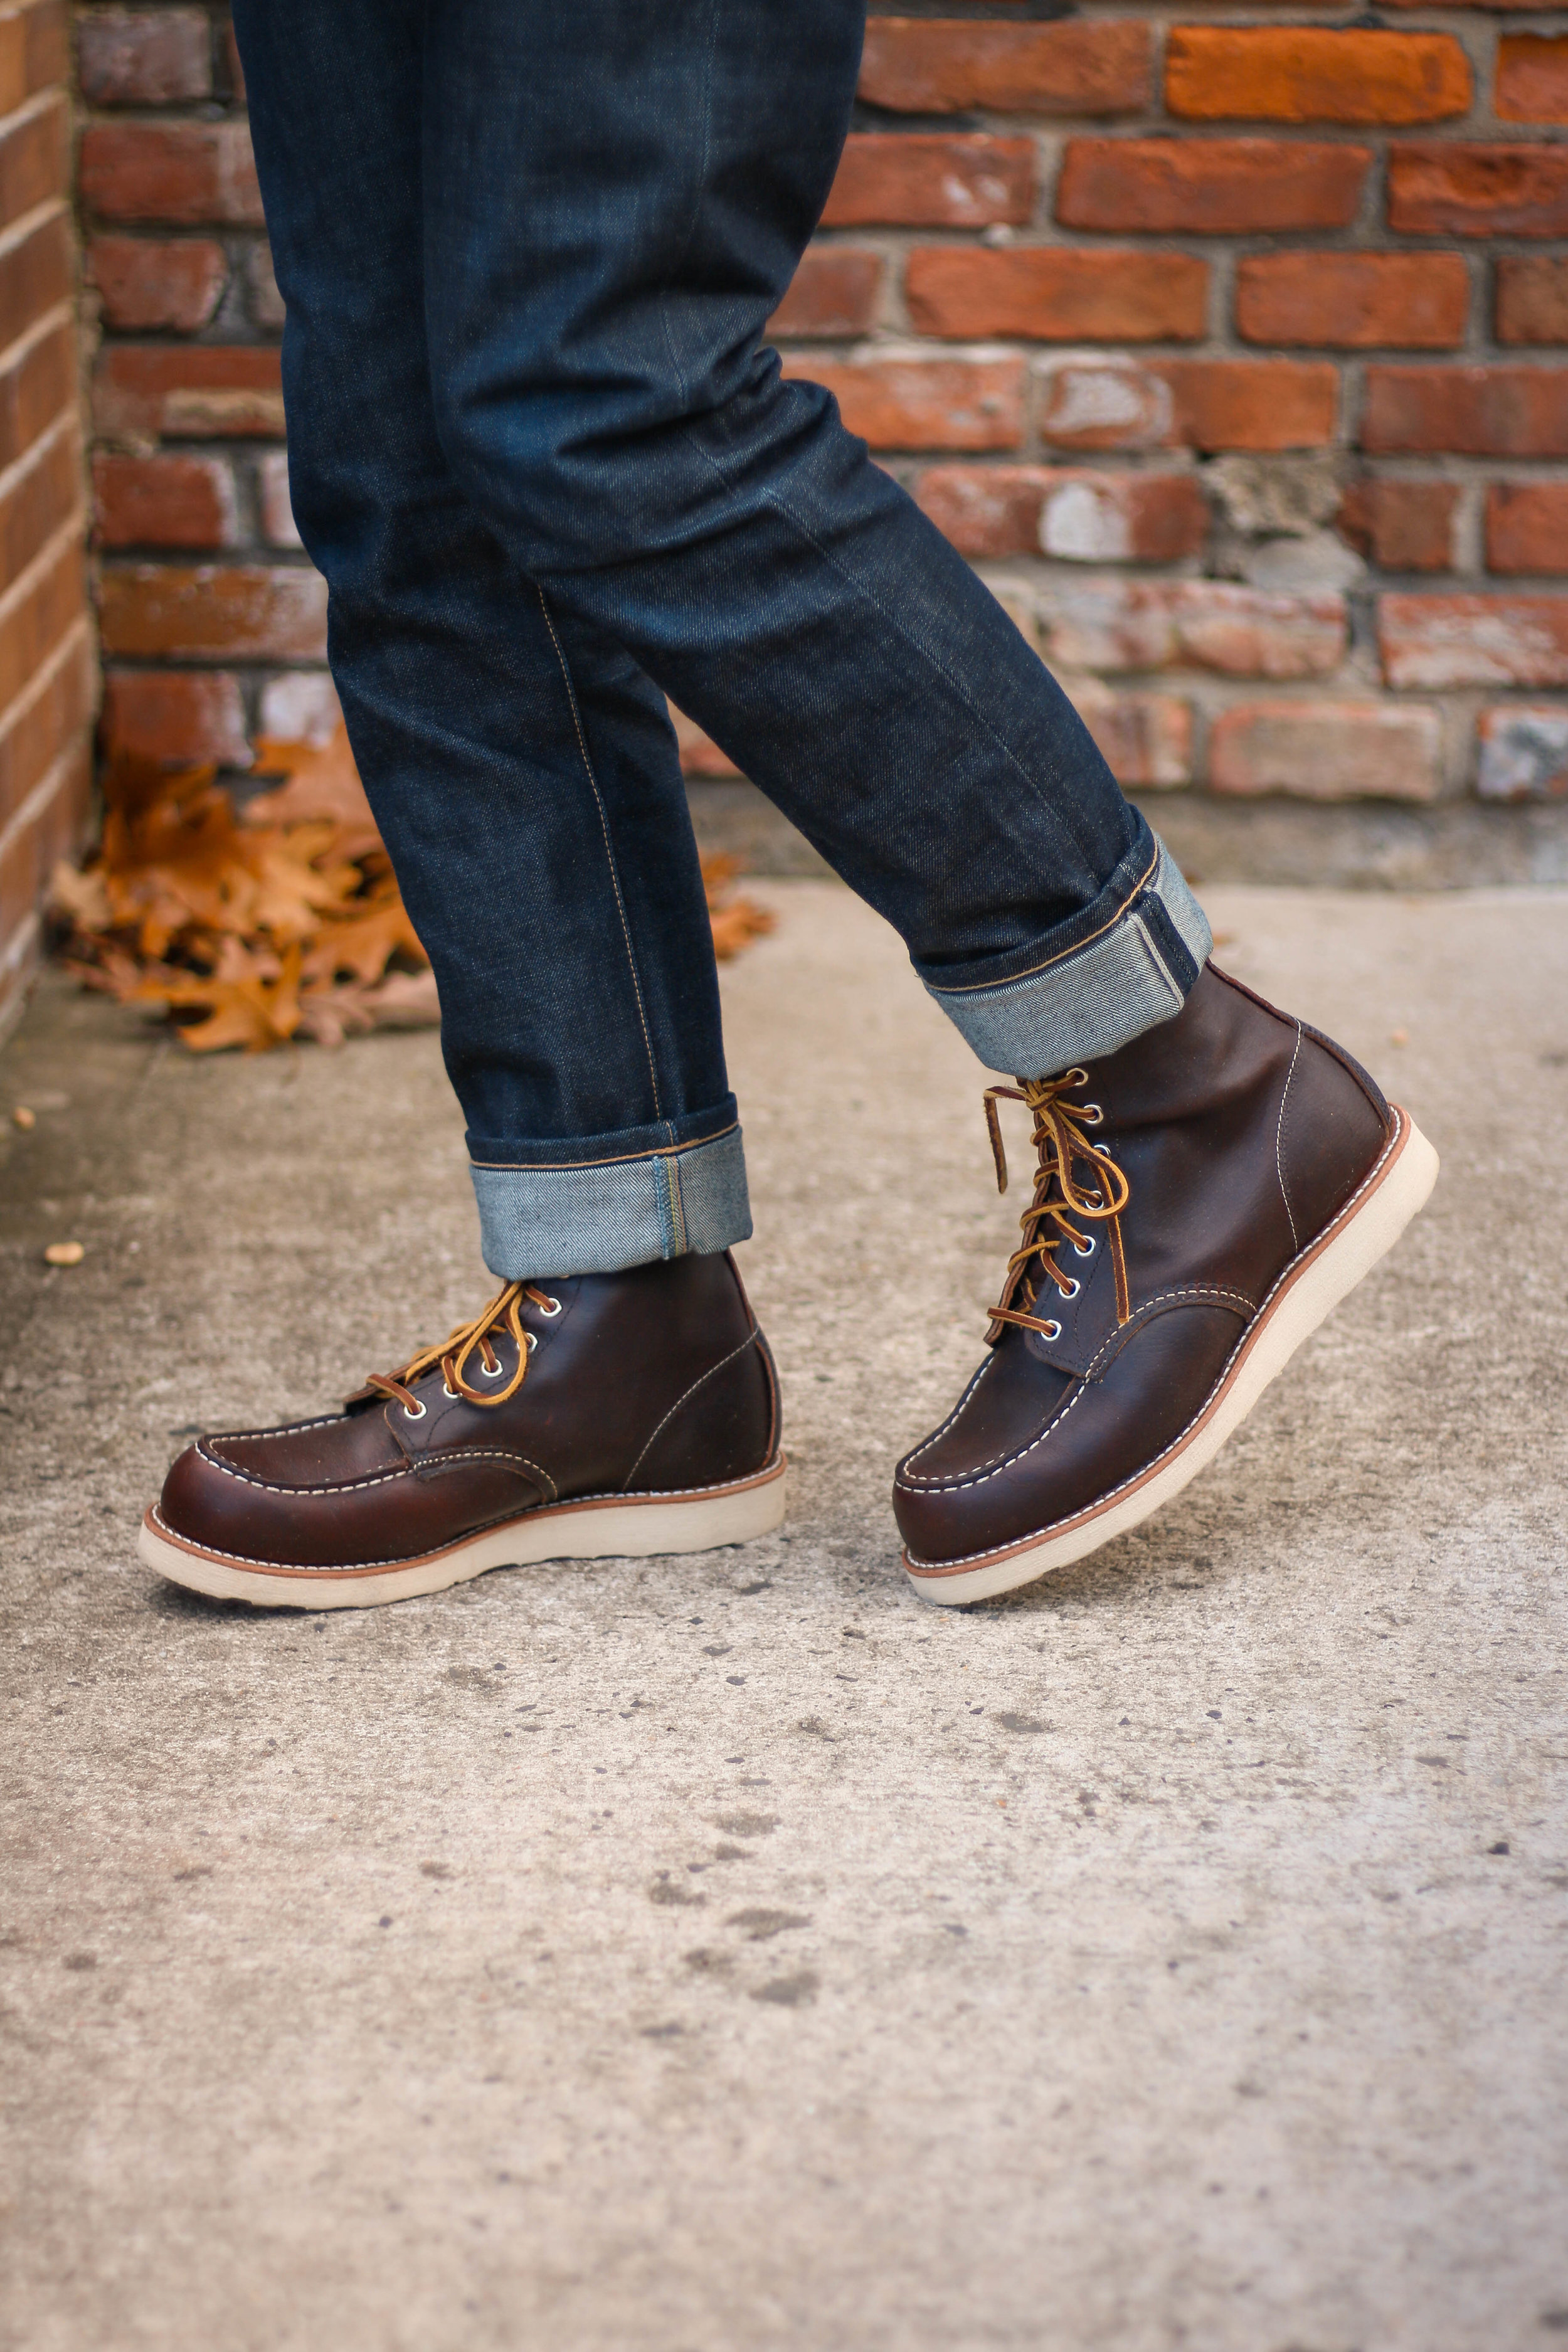 red wing moc toe resole